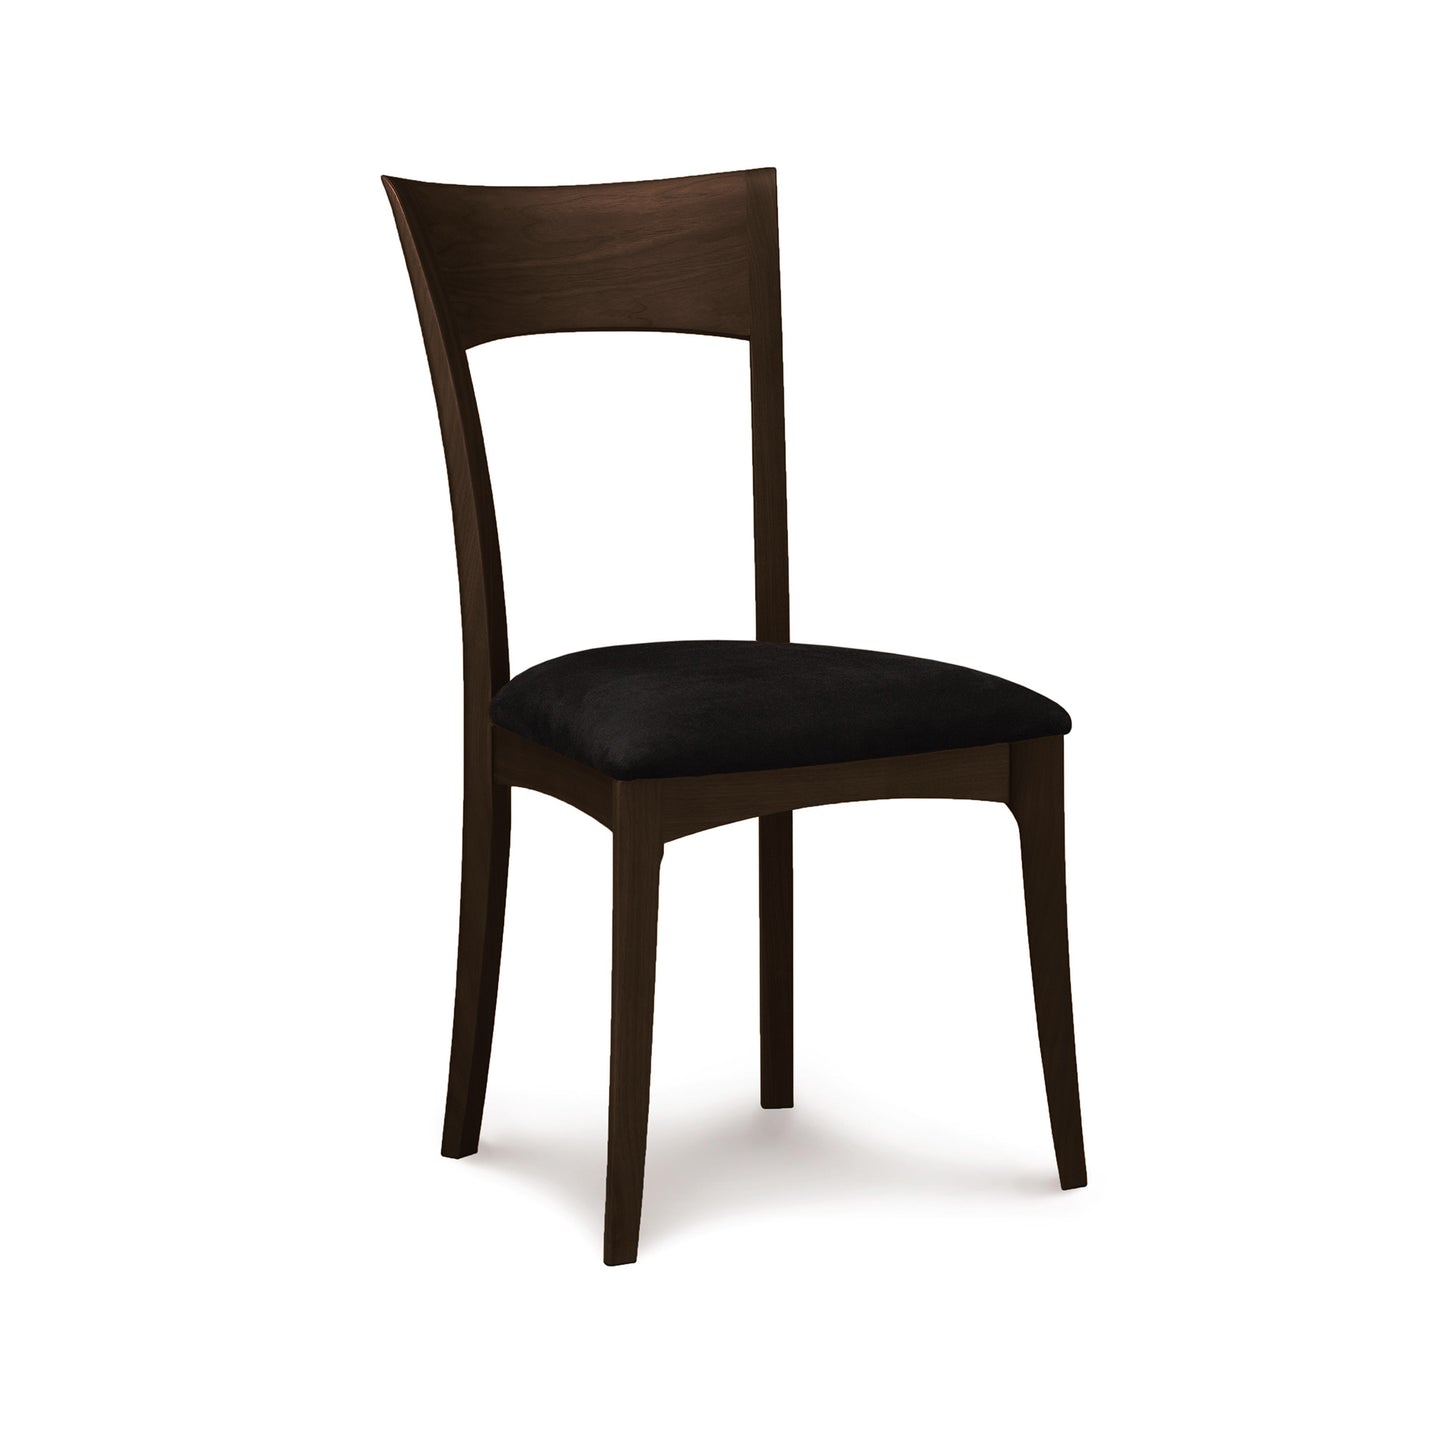 A single Ingrid Chair from the Copeland Furniture Sarah Dining Furniture Collection, isolated against a white background.